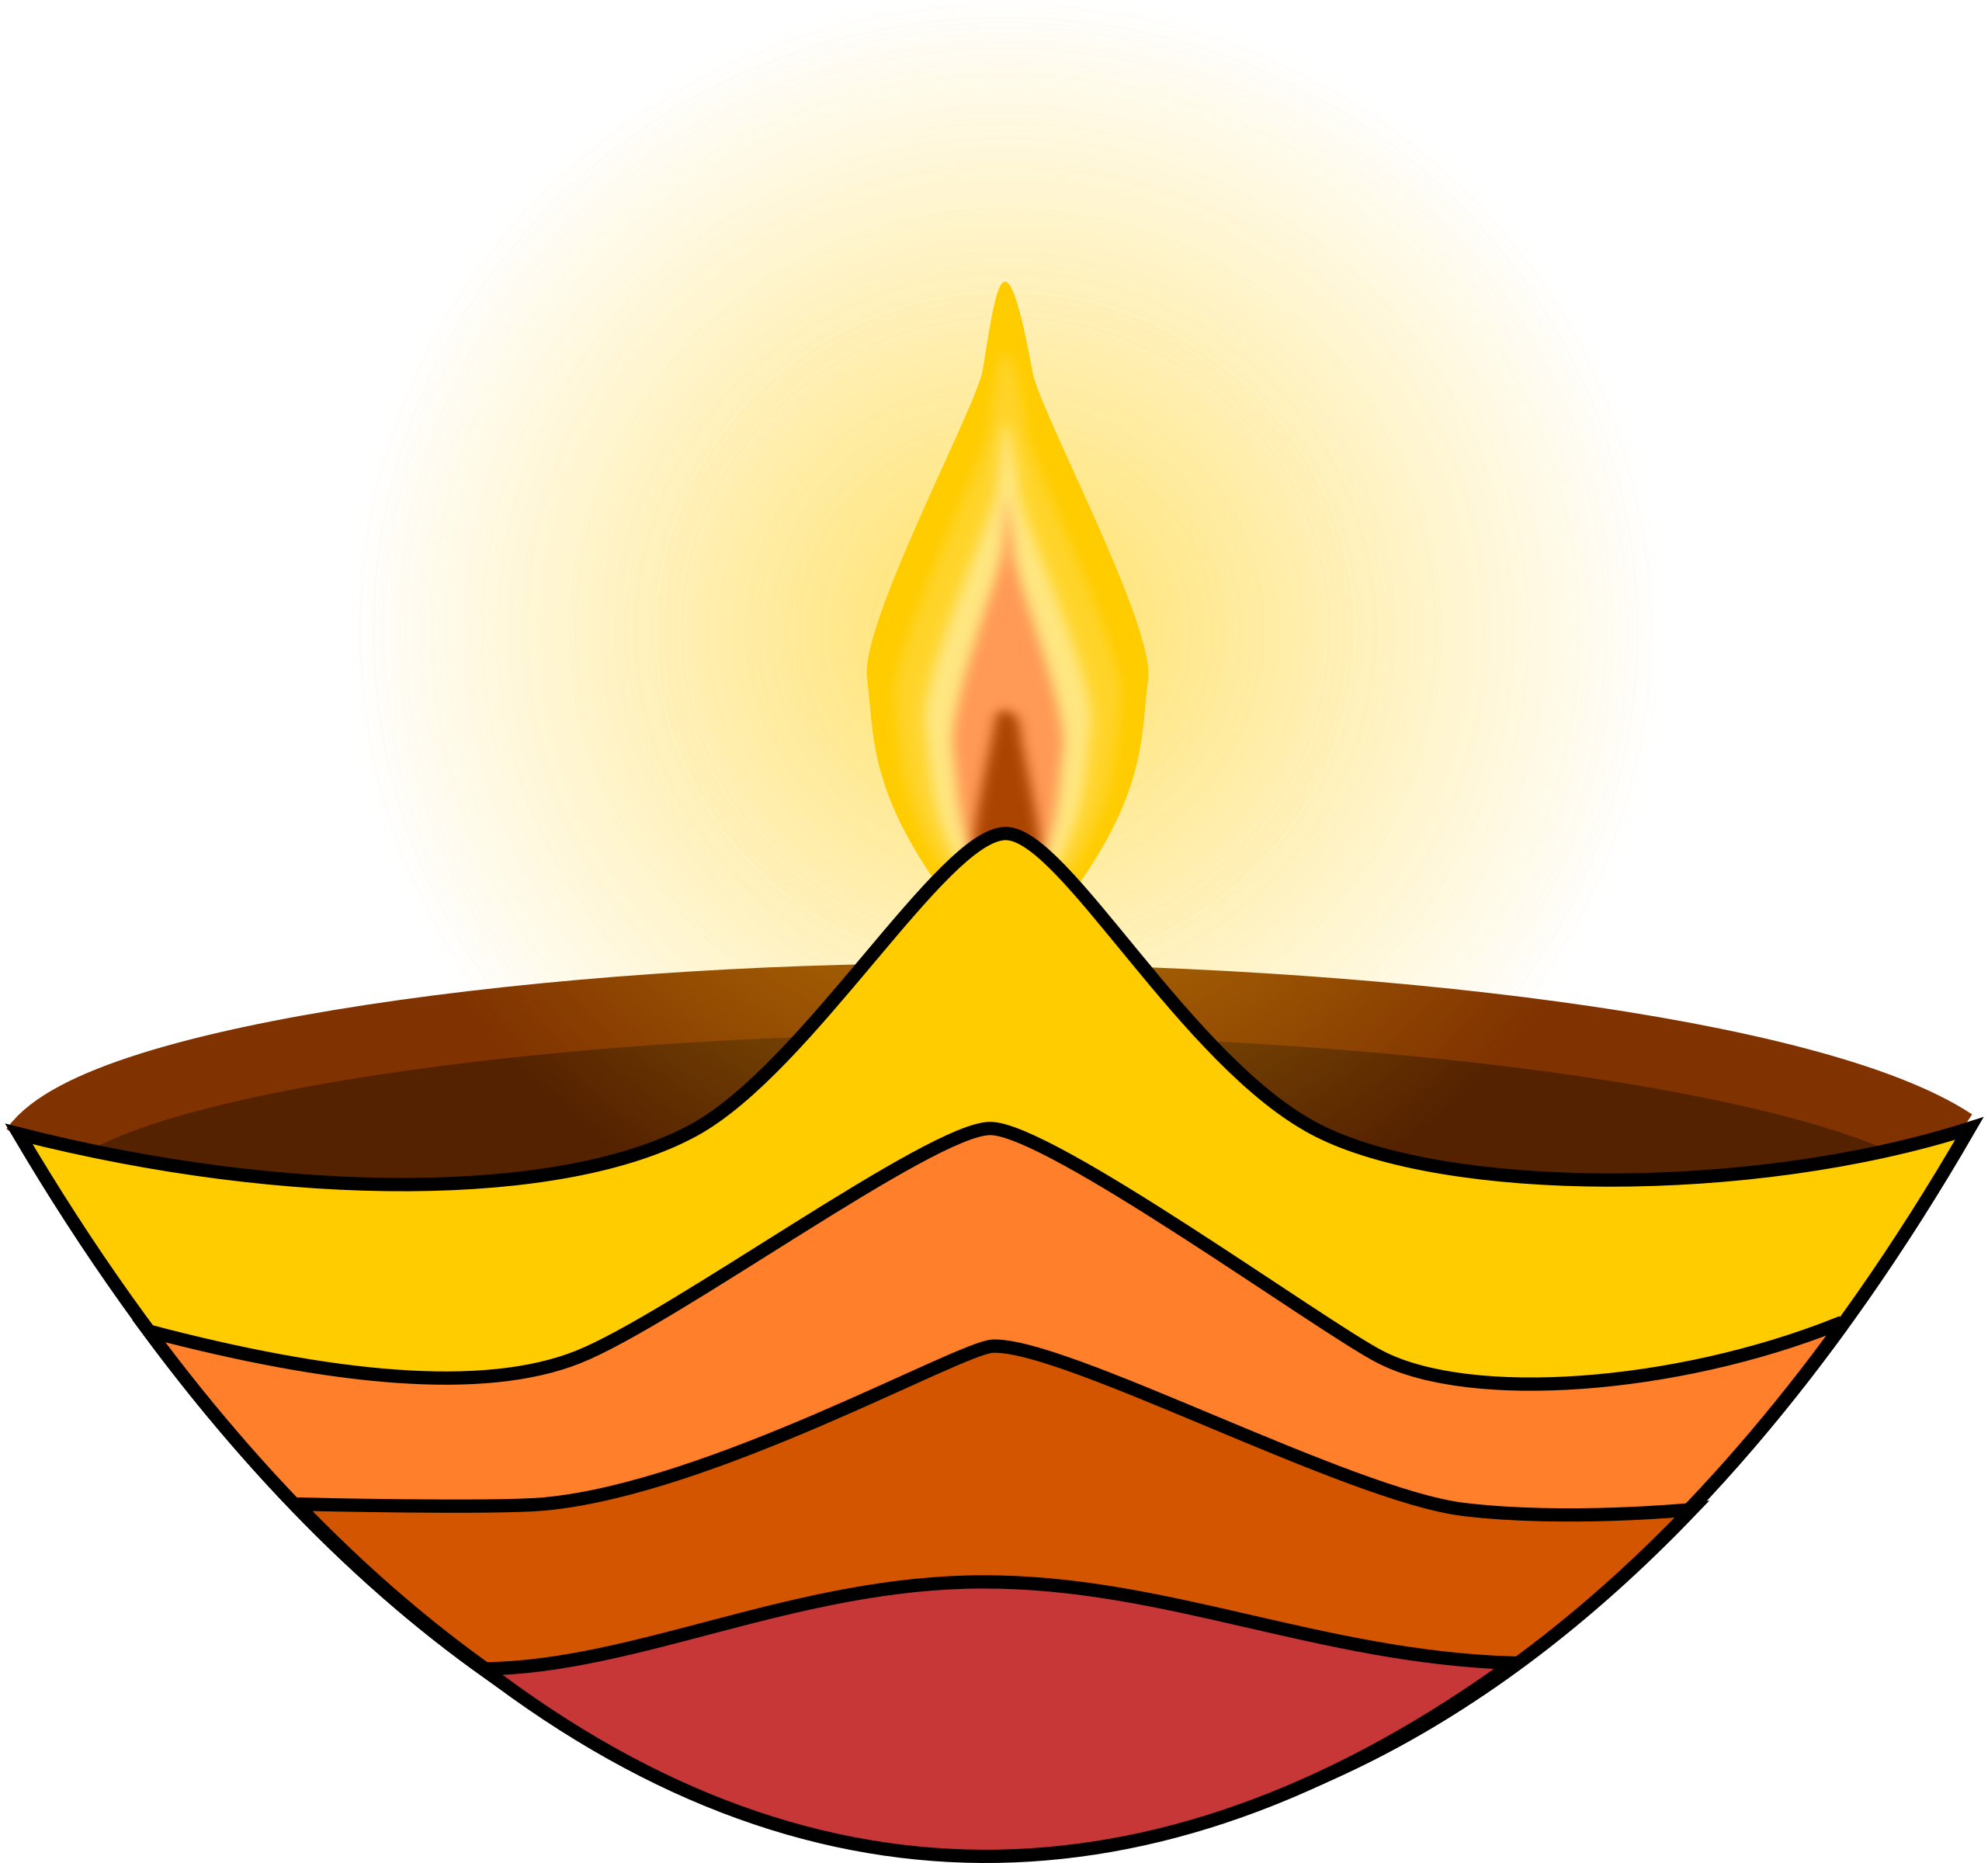  collection of traditional. Lamp clipart hindu puja